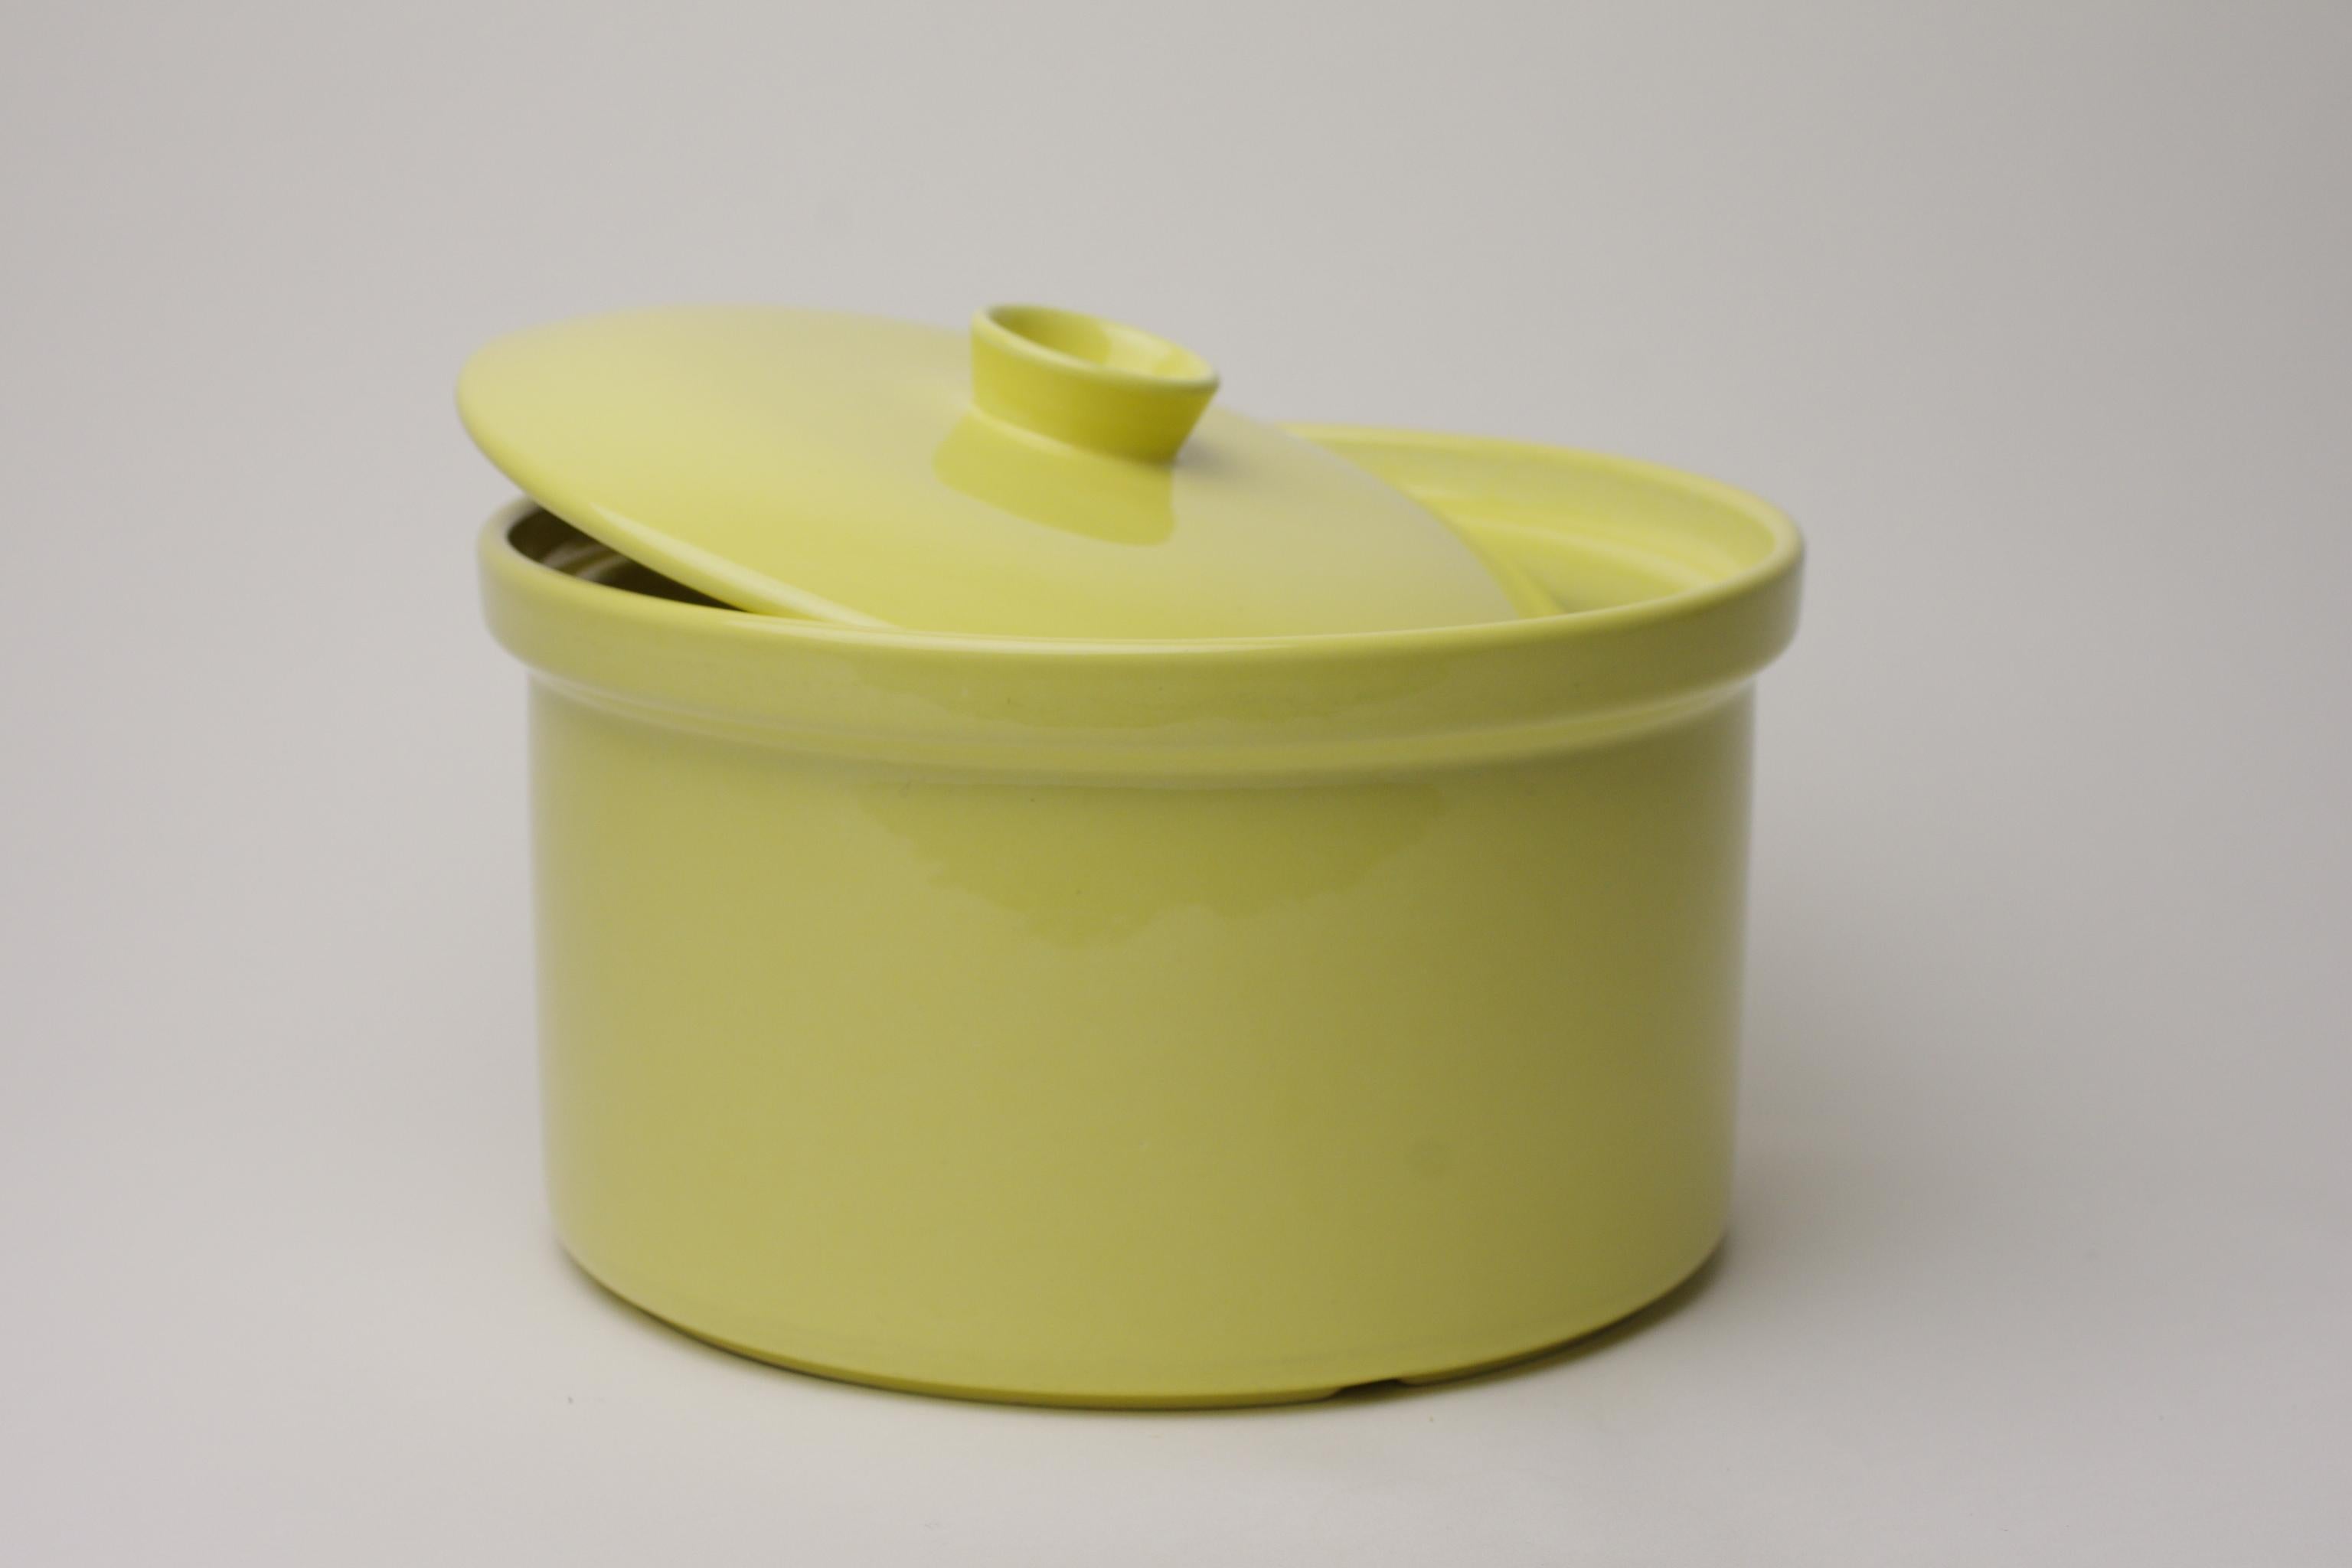 Product Description
This casserole was designed by Kaj Franck for Arabia in 1951. From 1953 onwards the item has been produced under the series name 